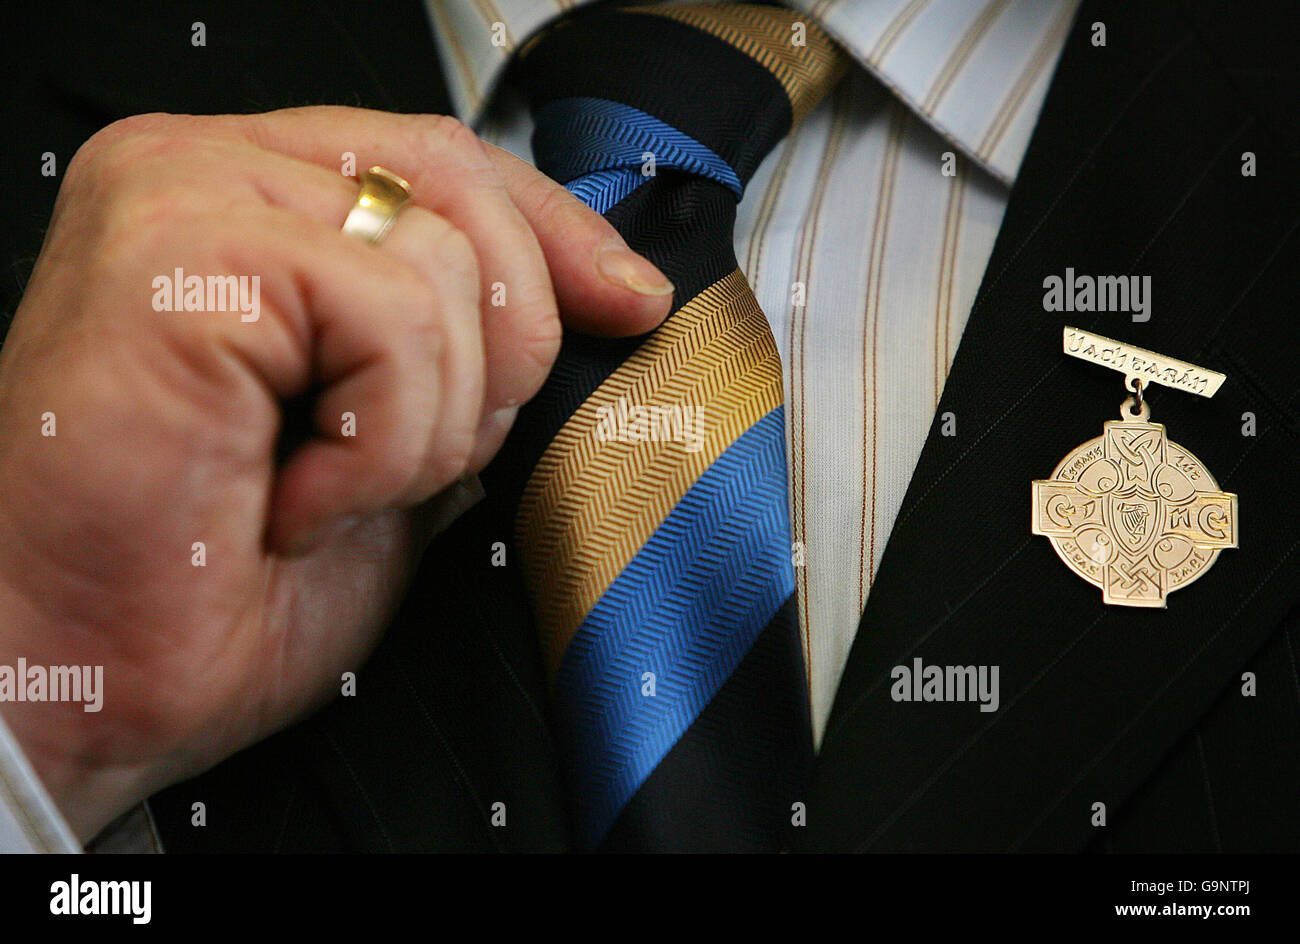 GAA President Nicky Brennan adjusts his tie with a medal of the GAA on his lapel at a press conference where increased Croke Park ticket prices were discussed. Stock Photo